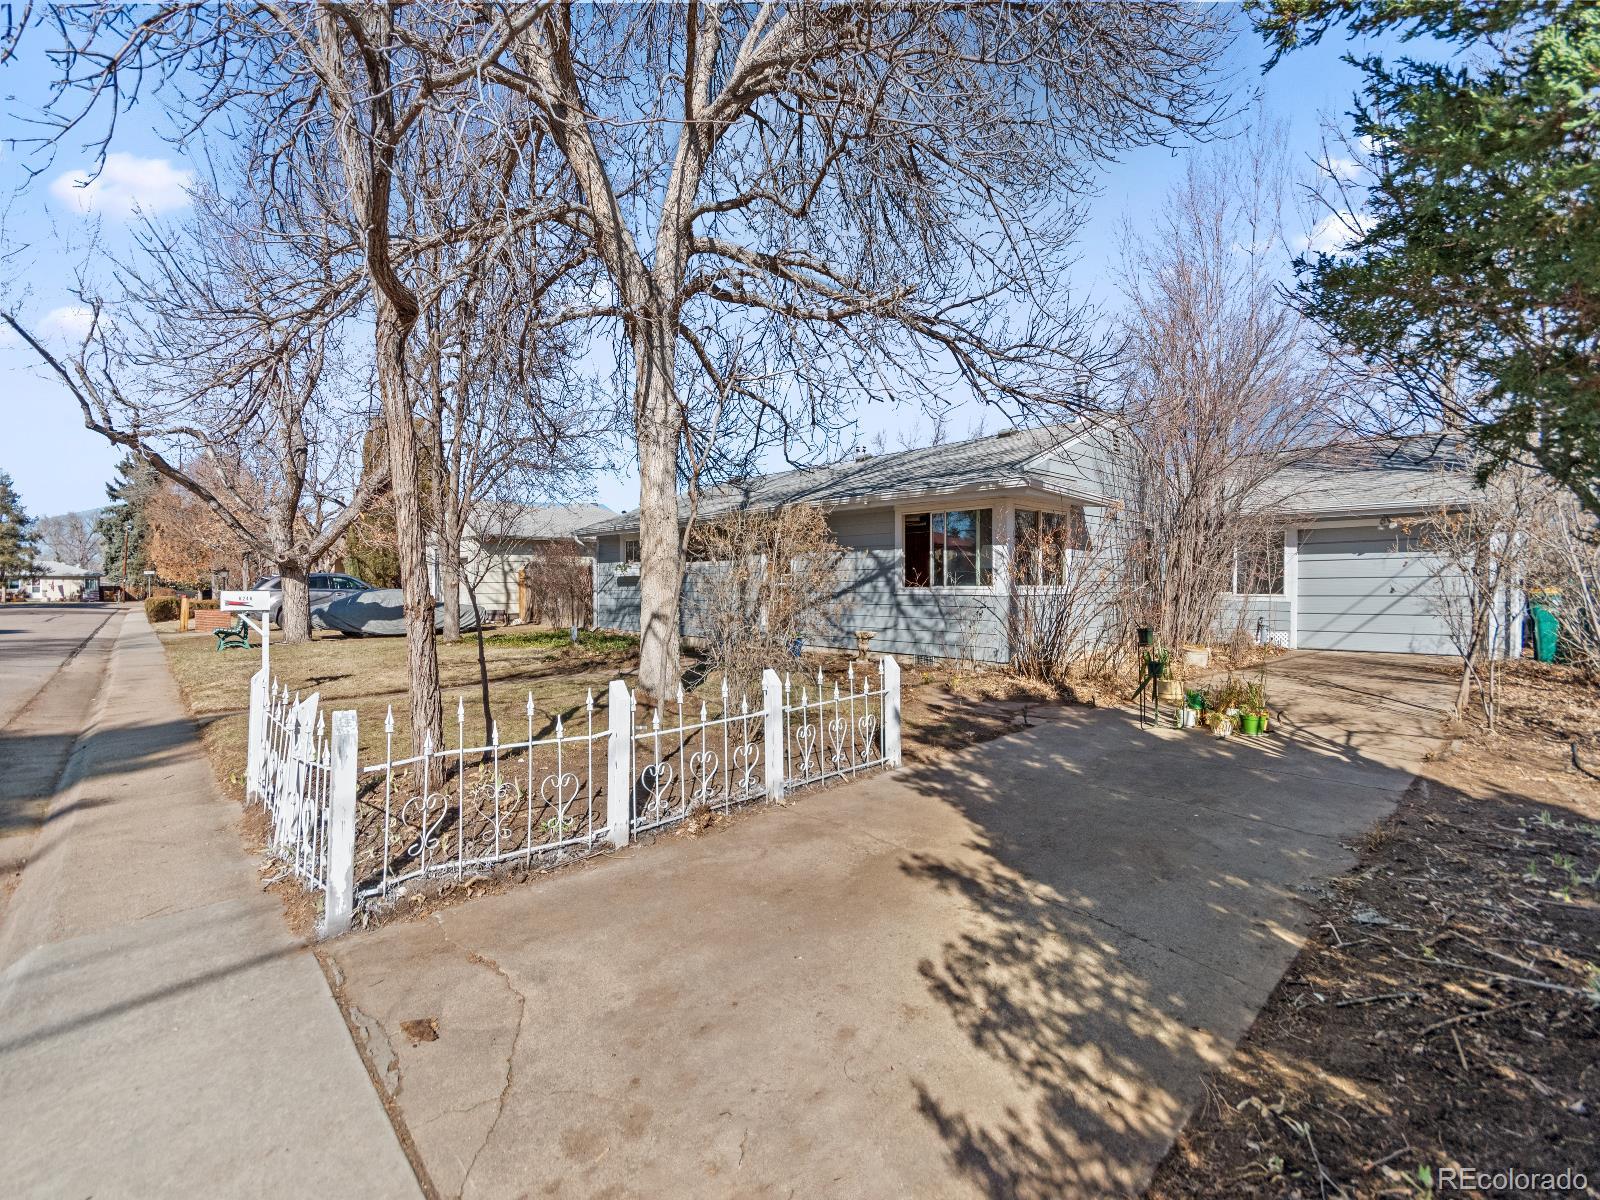 Report Image for 6246 S Sycamore Street,Littleton, Colorado